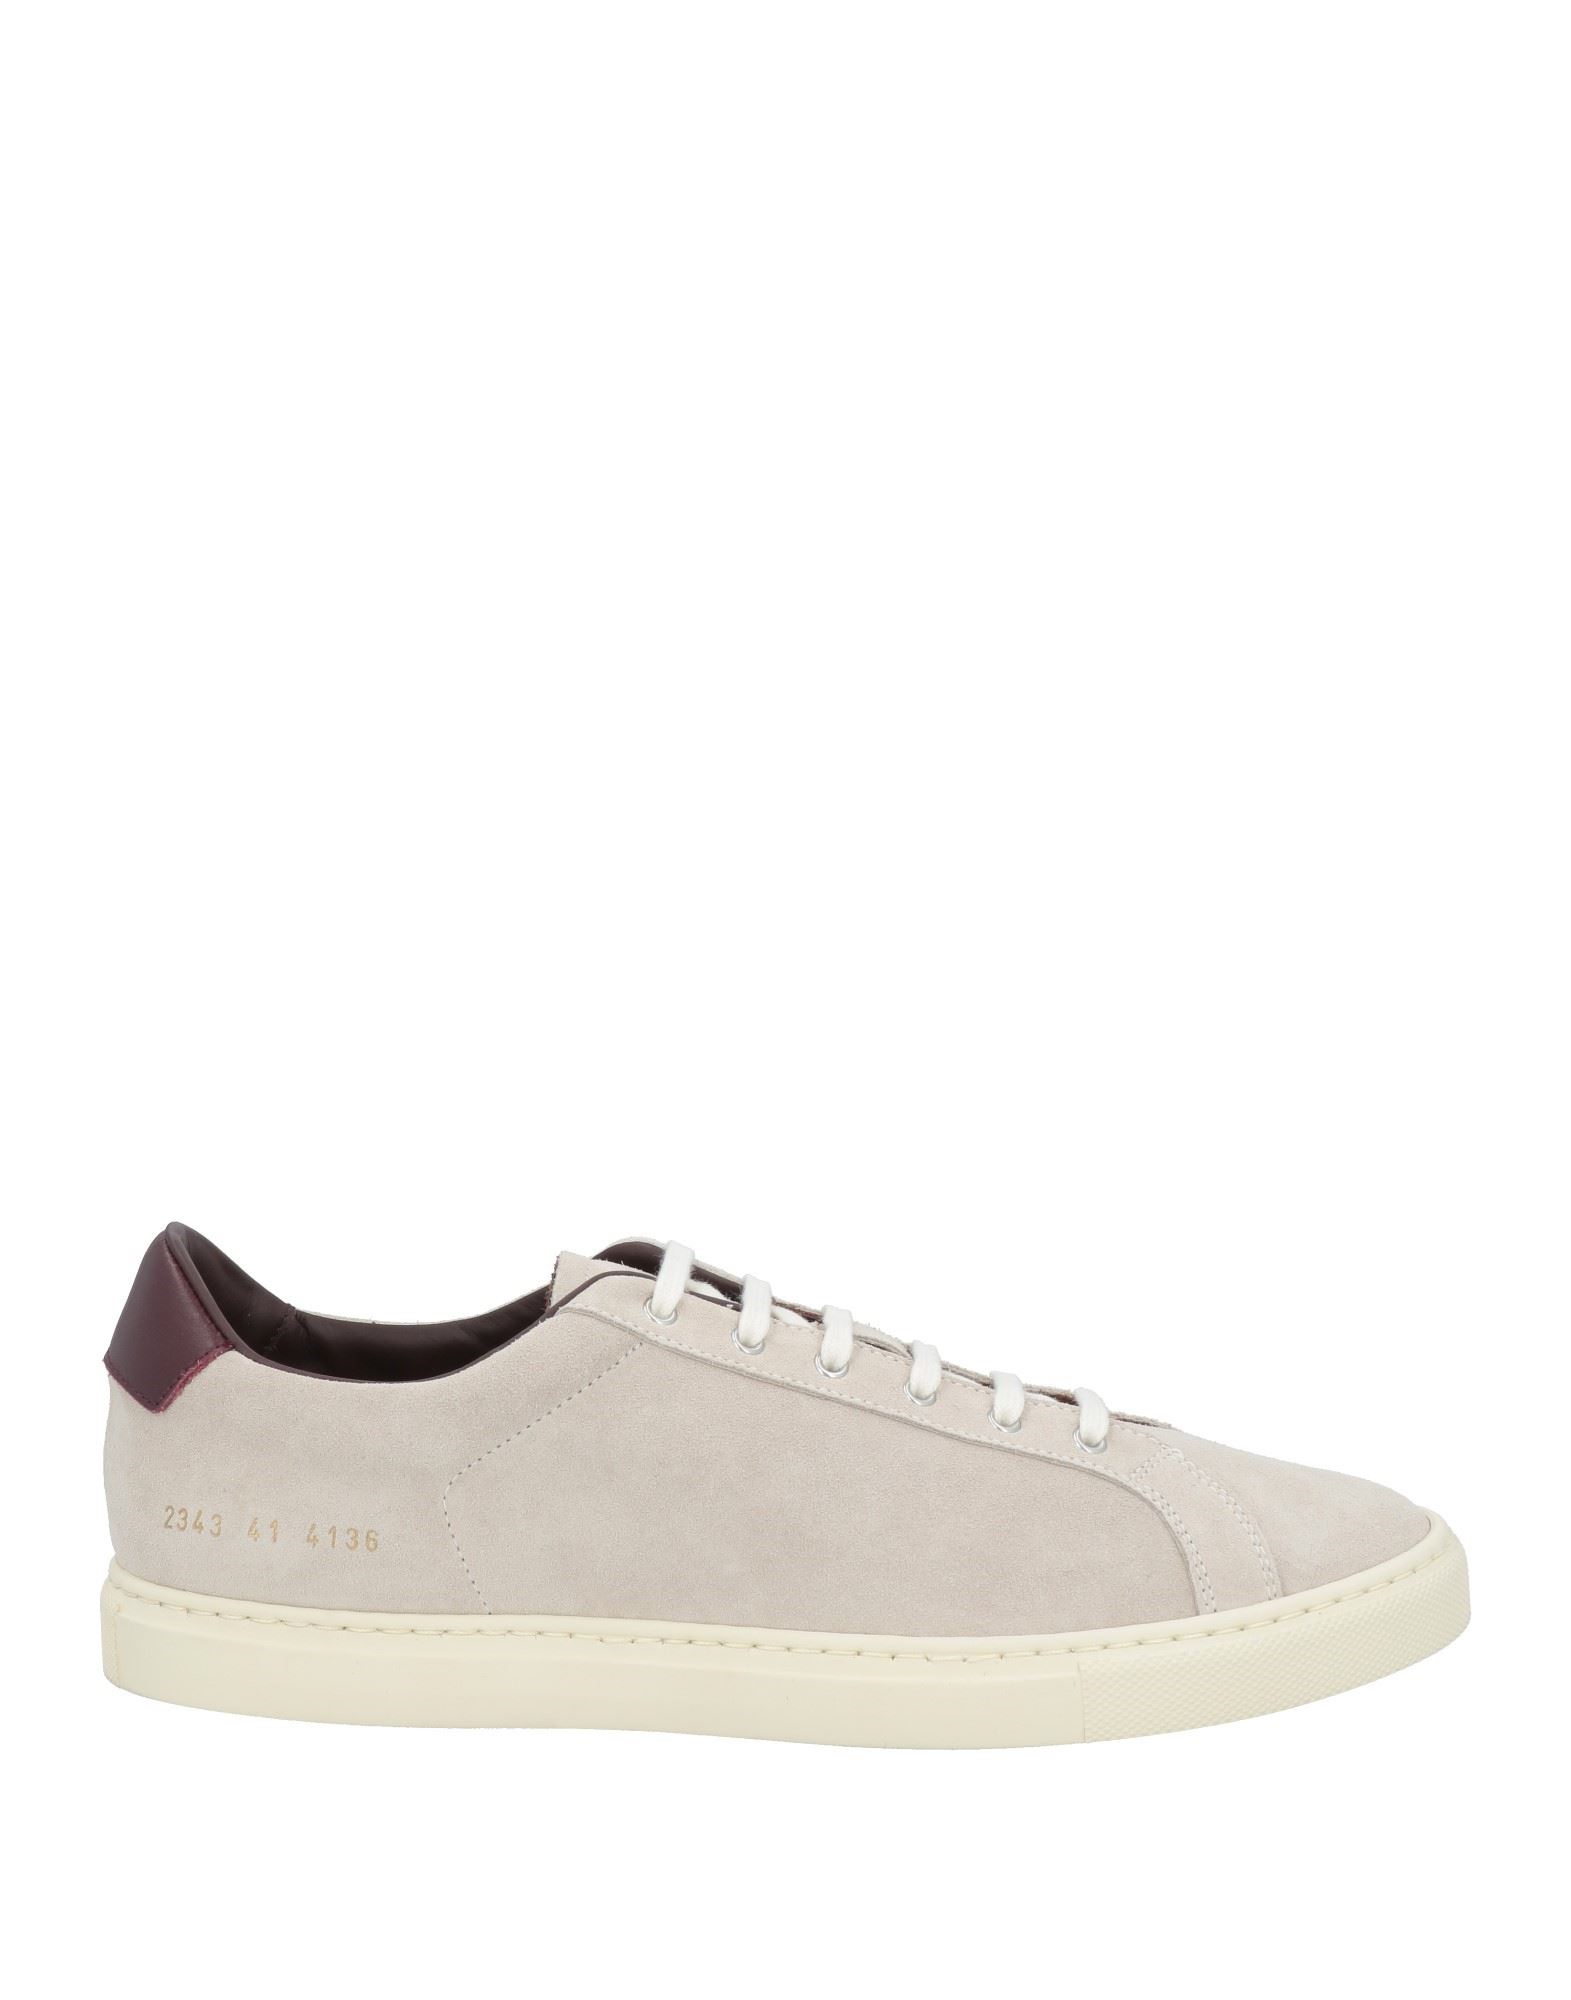 COMMON PROJECTS Sneakers Herren Off white von COMMON PROJECTS